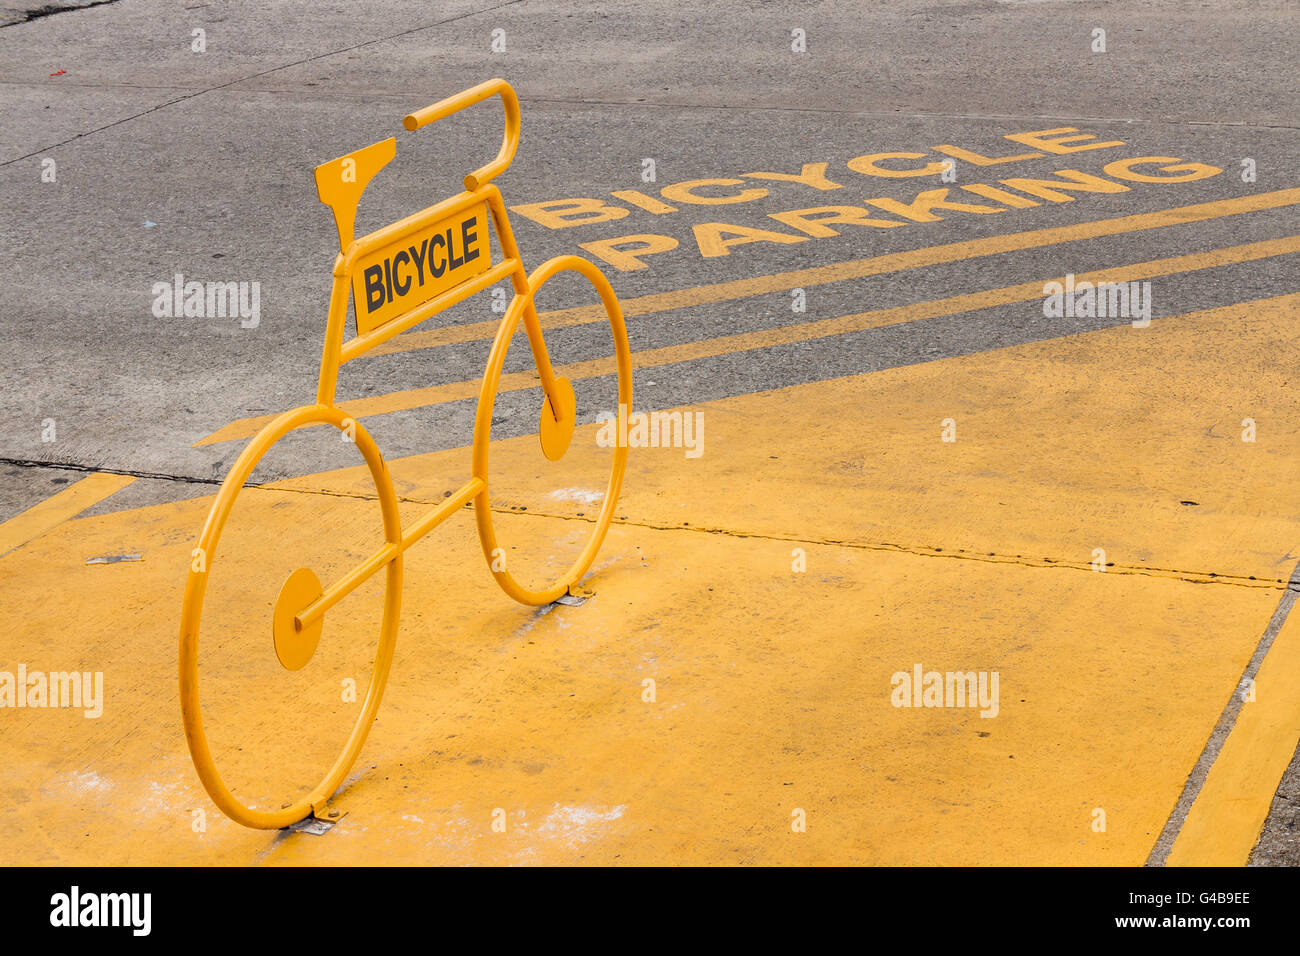 Bicycle parking yellow color Stock Photo